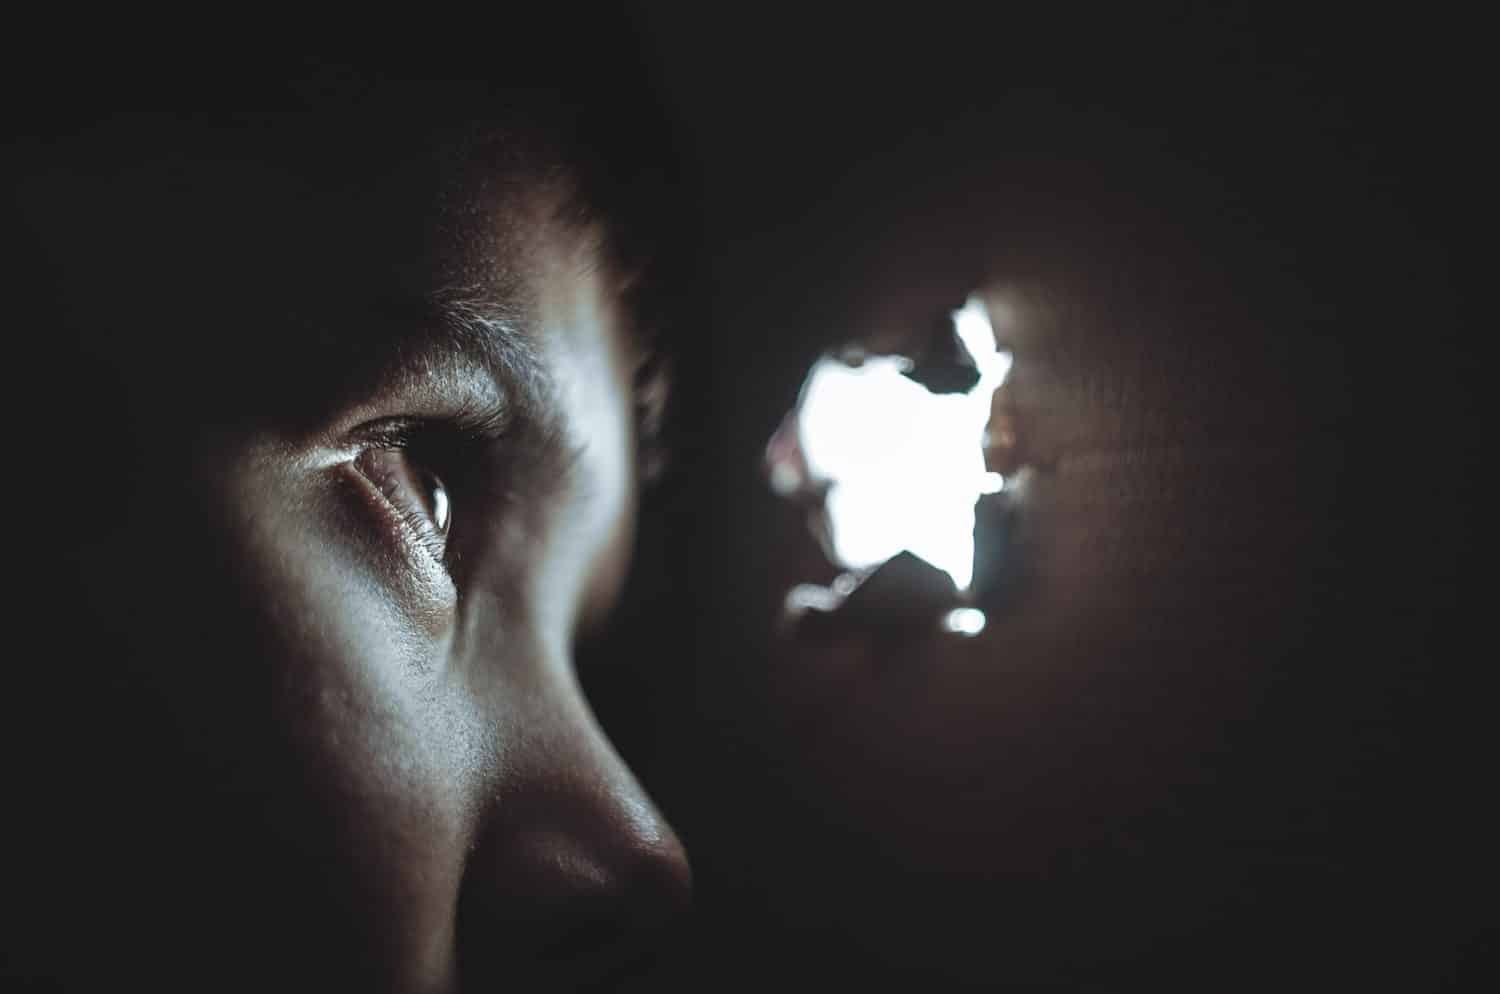 A boy is looking through a small window. It is a representative of the power of EMDR therapy.